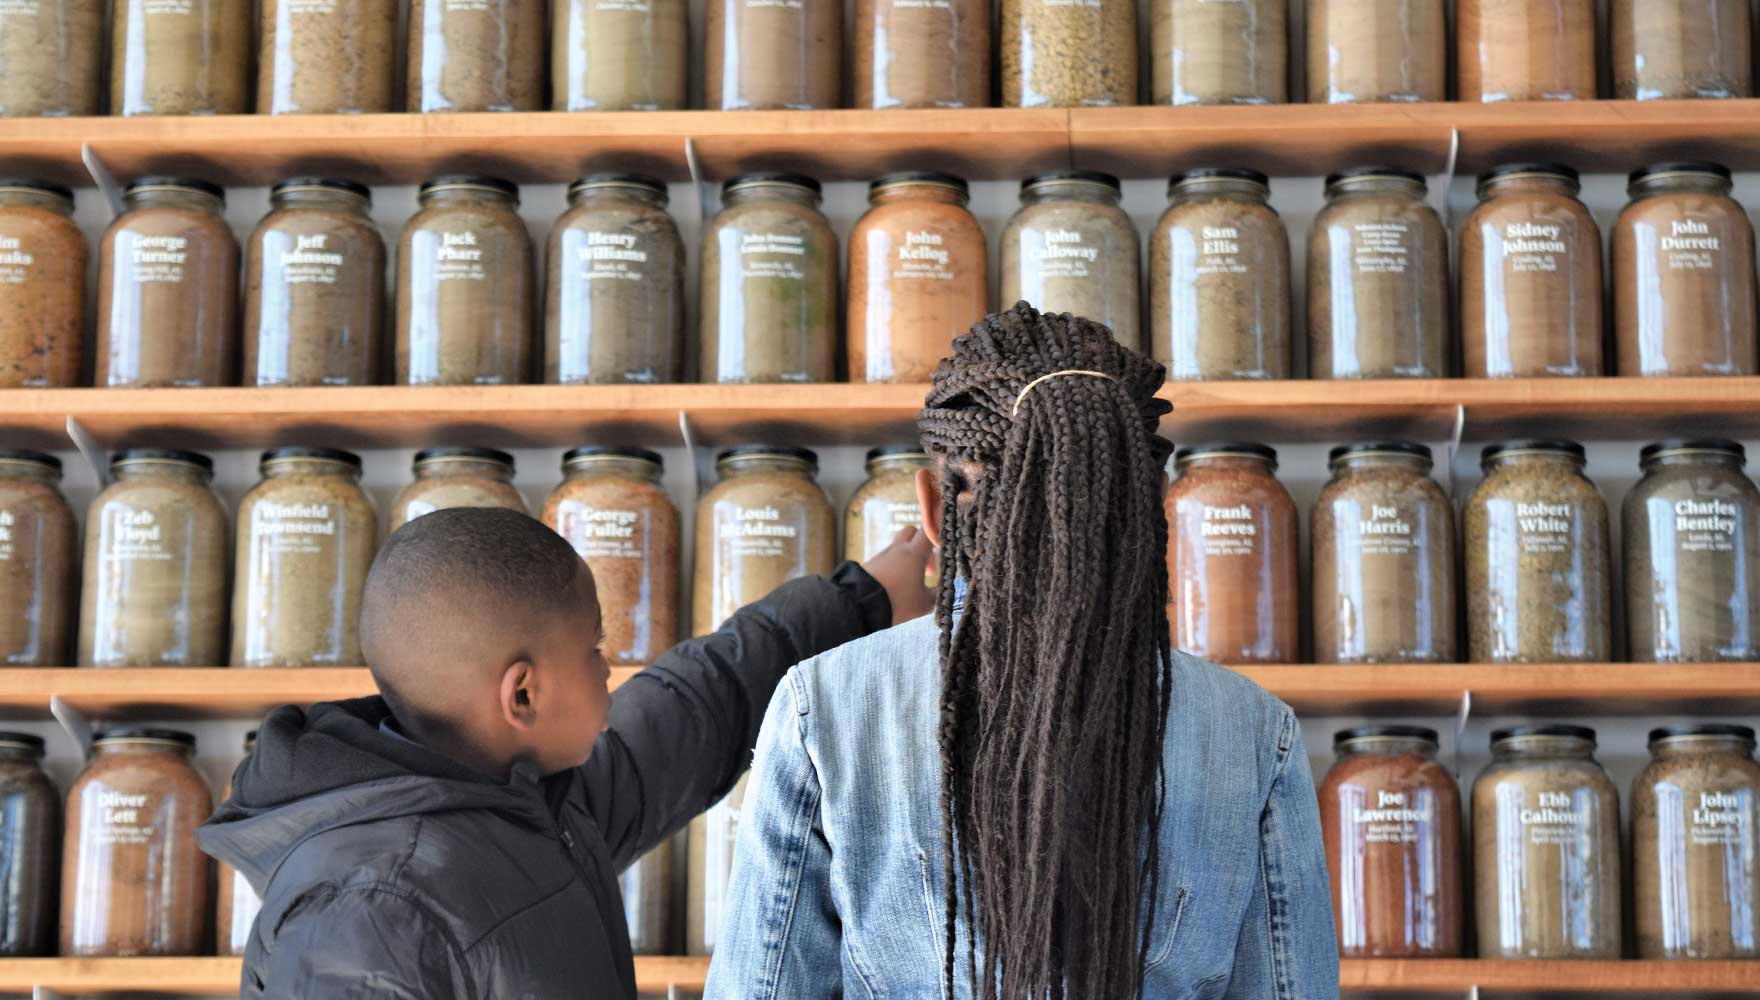 A young boy points out to his older sister one jar from a wall of jars containing soil from the sites of racial terror lynchings in Alabama.